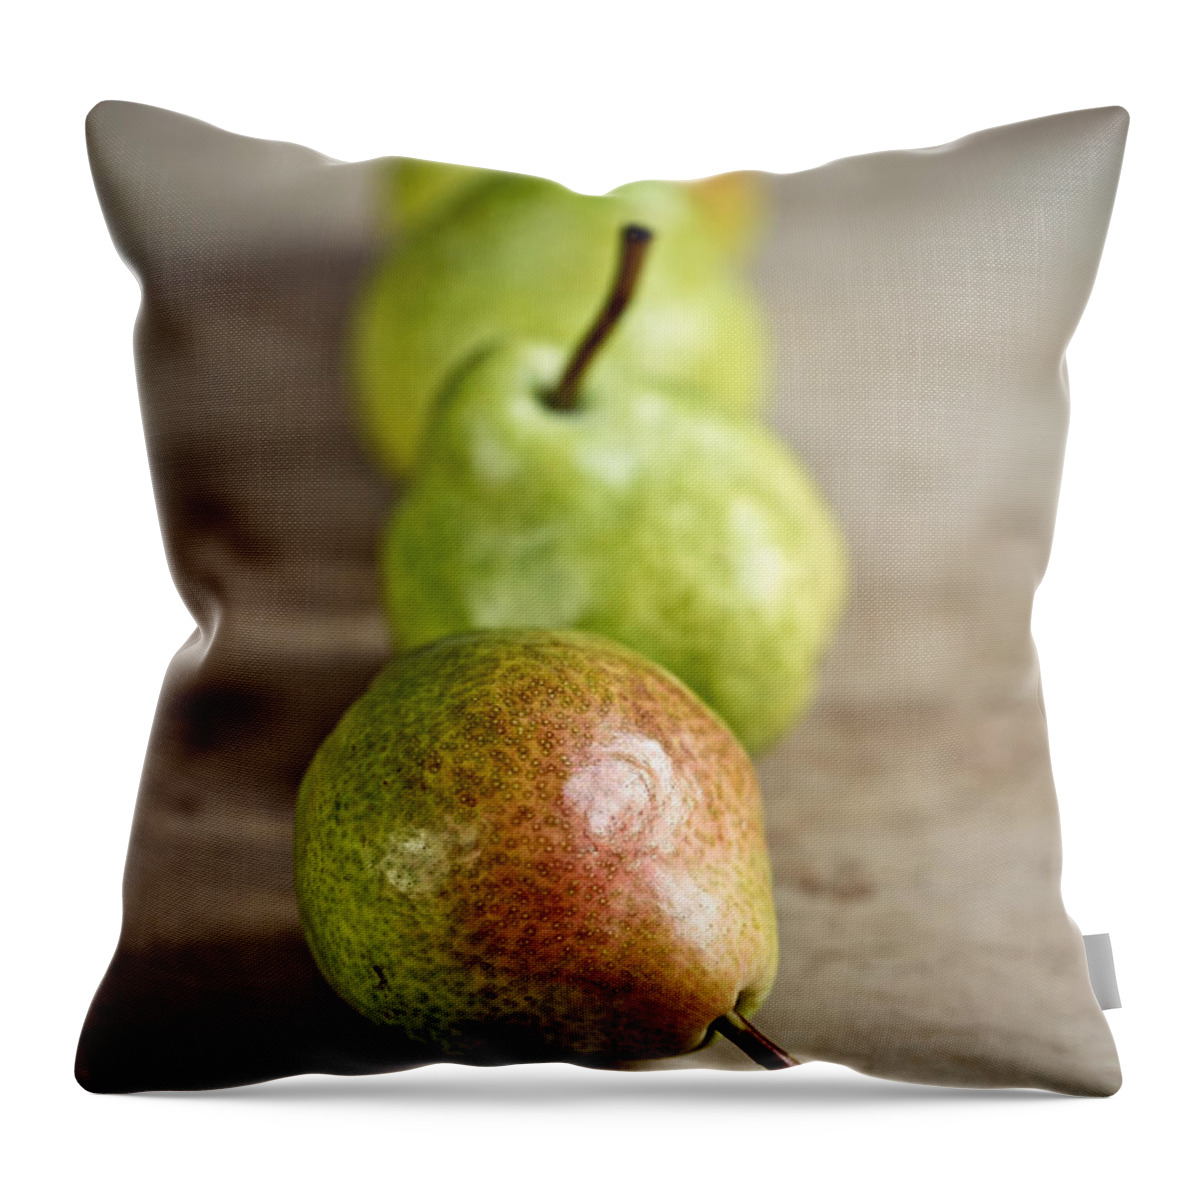 Pear Throw Pillow featuring the photograph Pears #6 by Nailia Schwarz